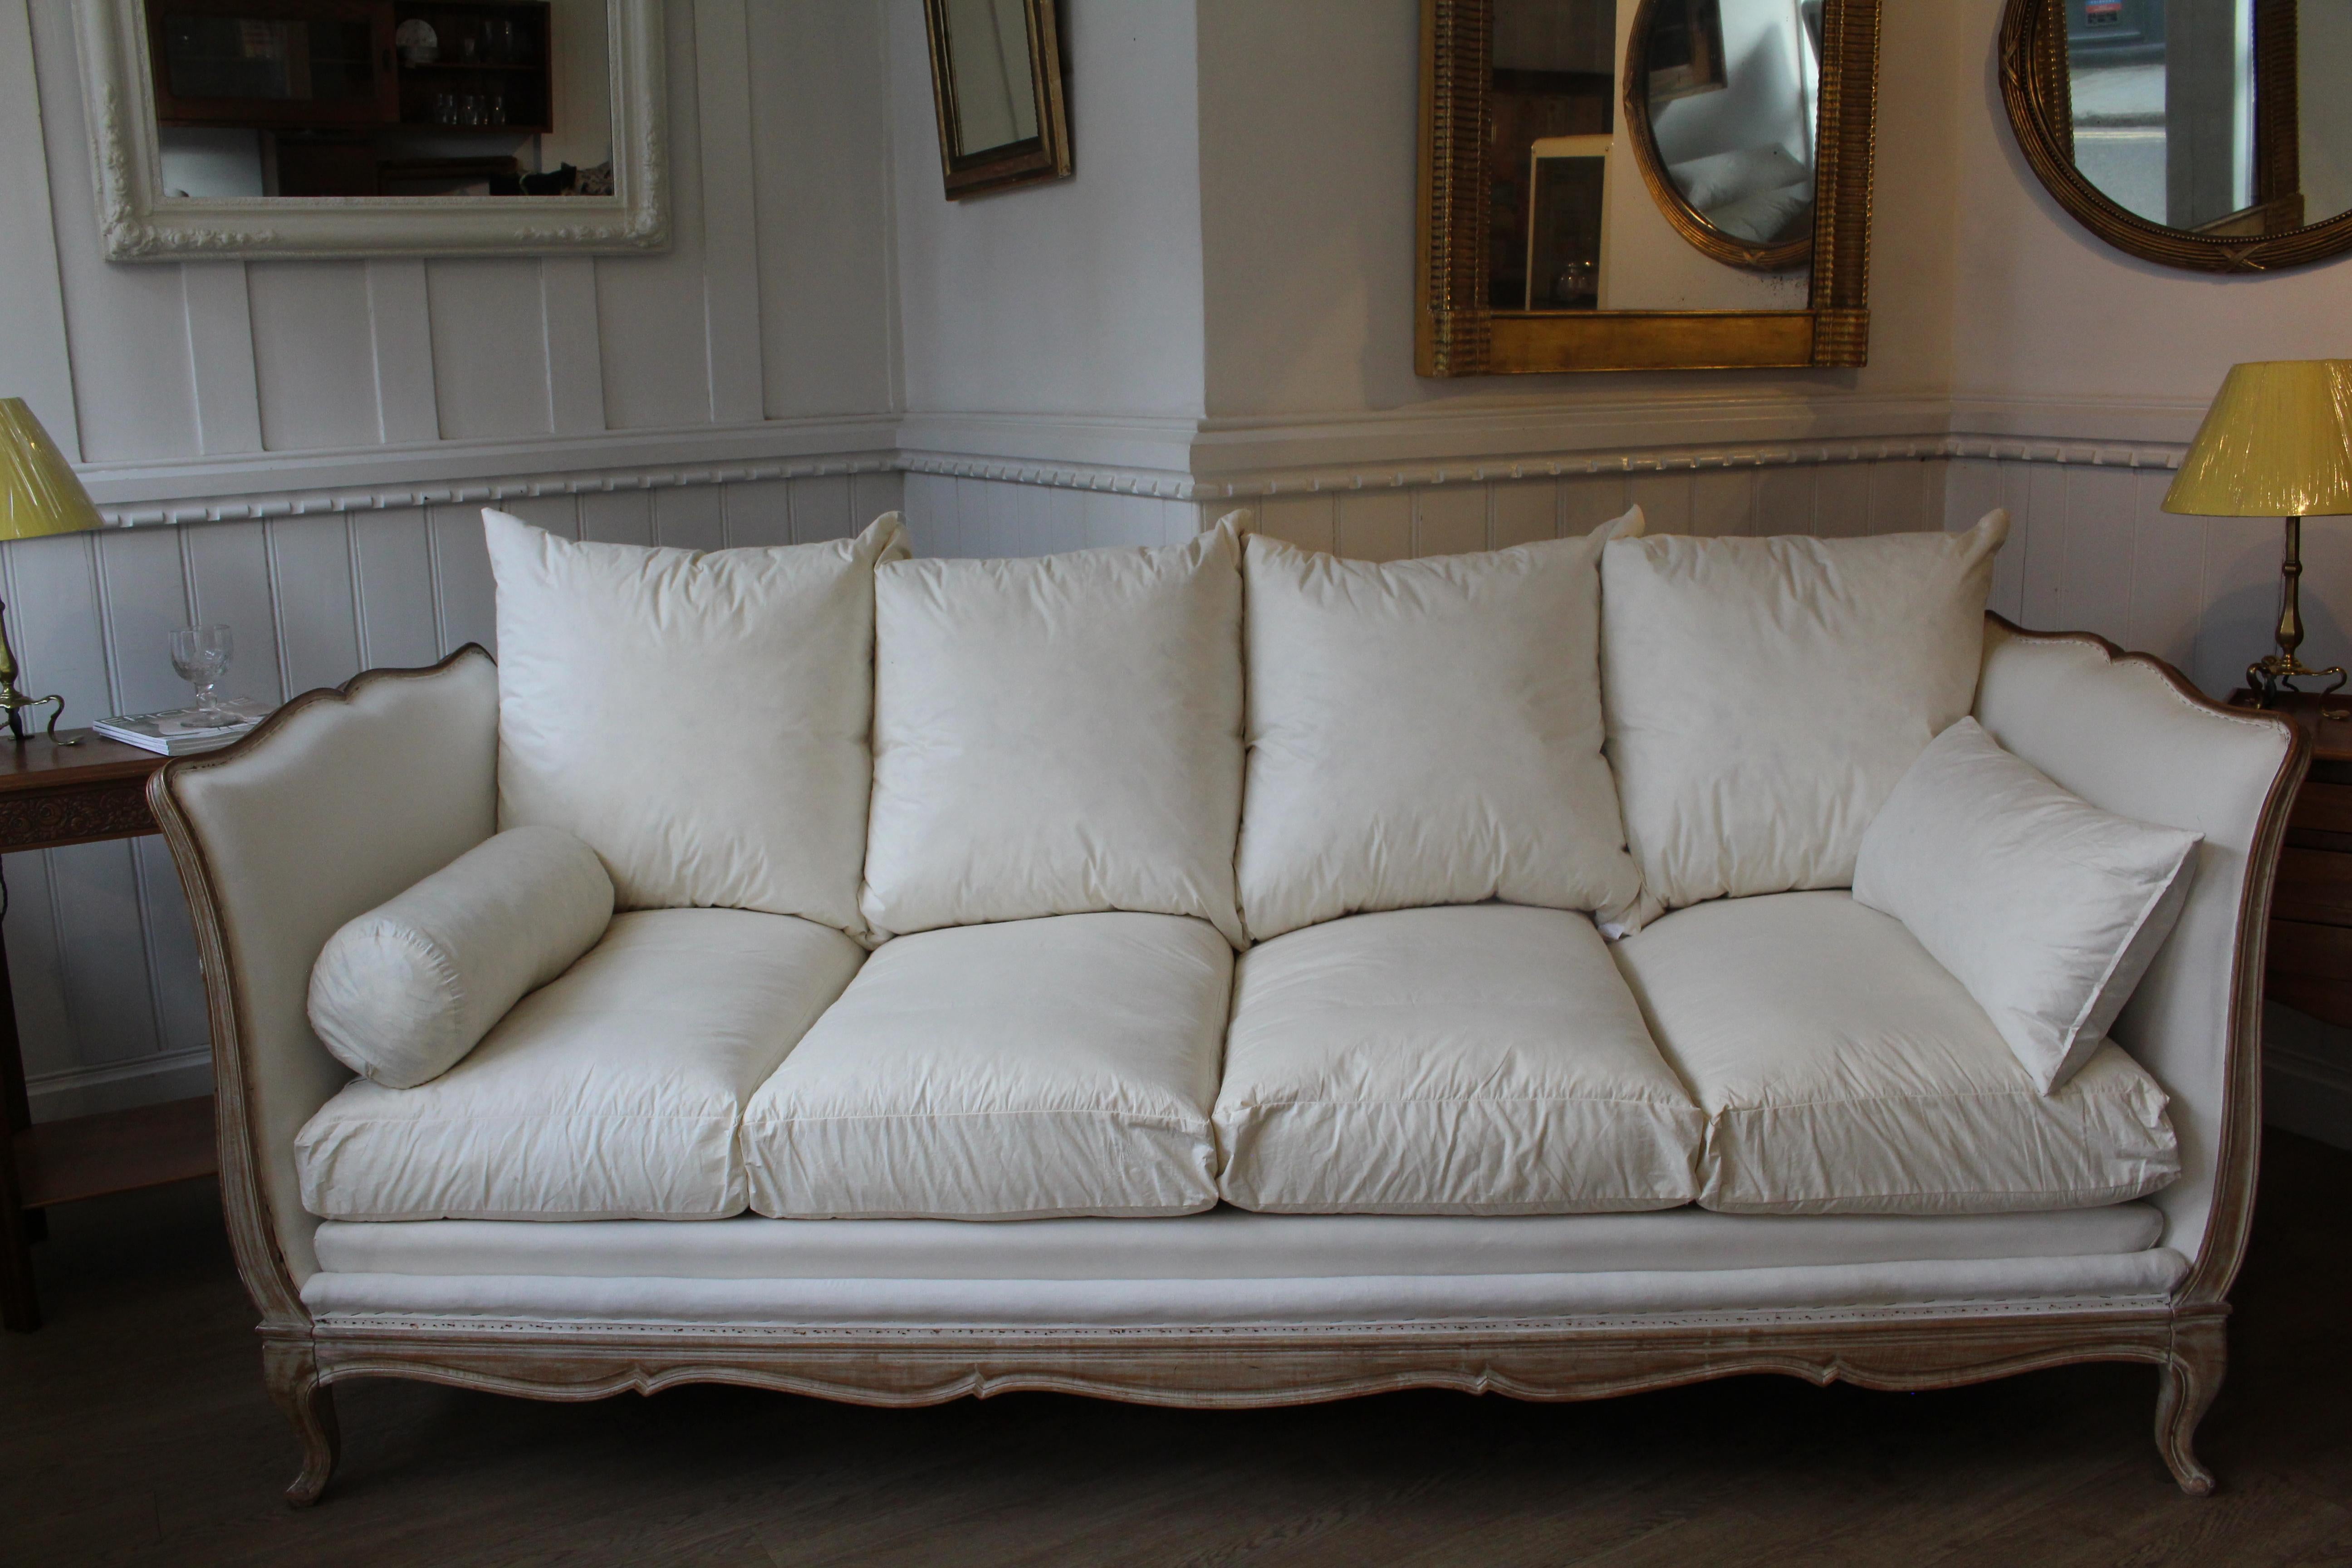 Beautifully shaped French daybed.
Newly re-upholstered in flame retardant calico, ready for new fabric to be applied.
This elegant piece can be used in the middle of a room as a daybed (with 2 long bolster cushions, which I will supply); or, as a